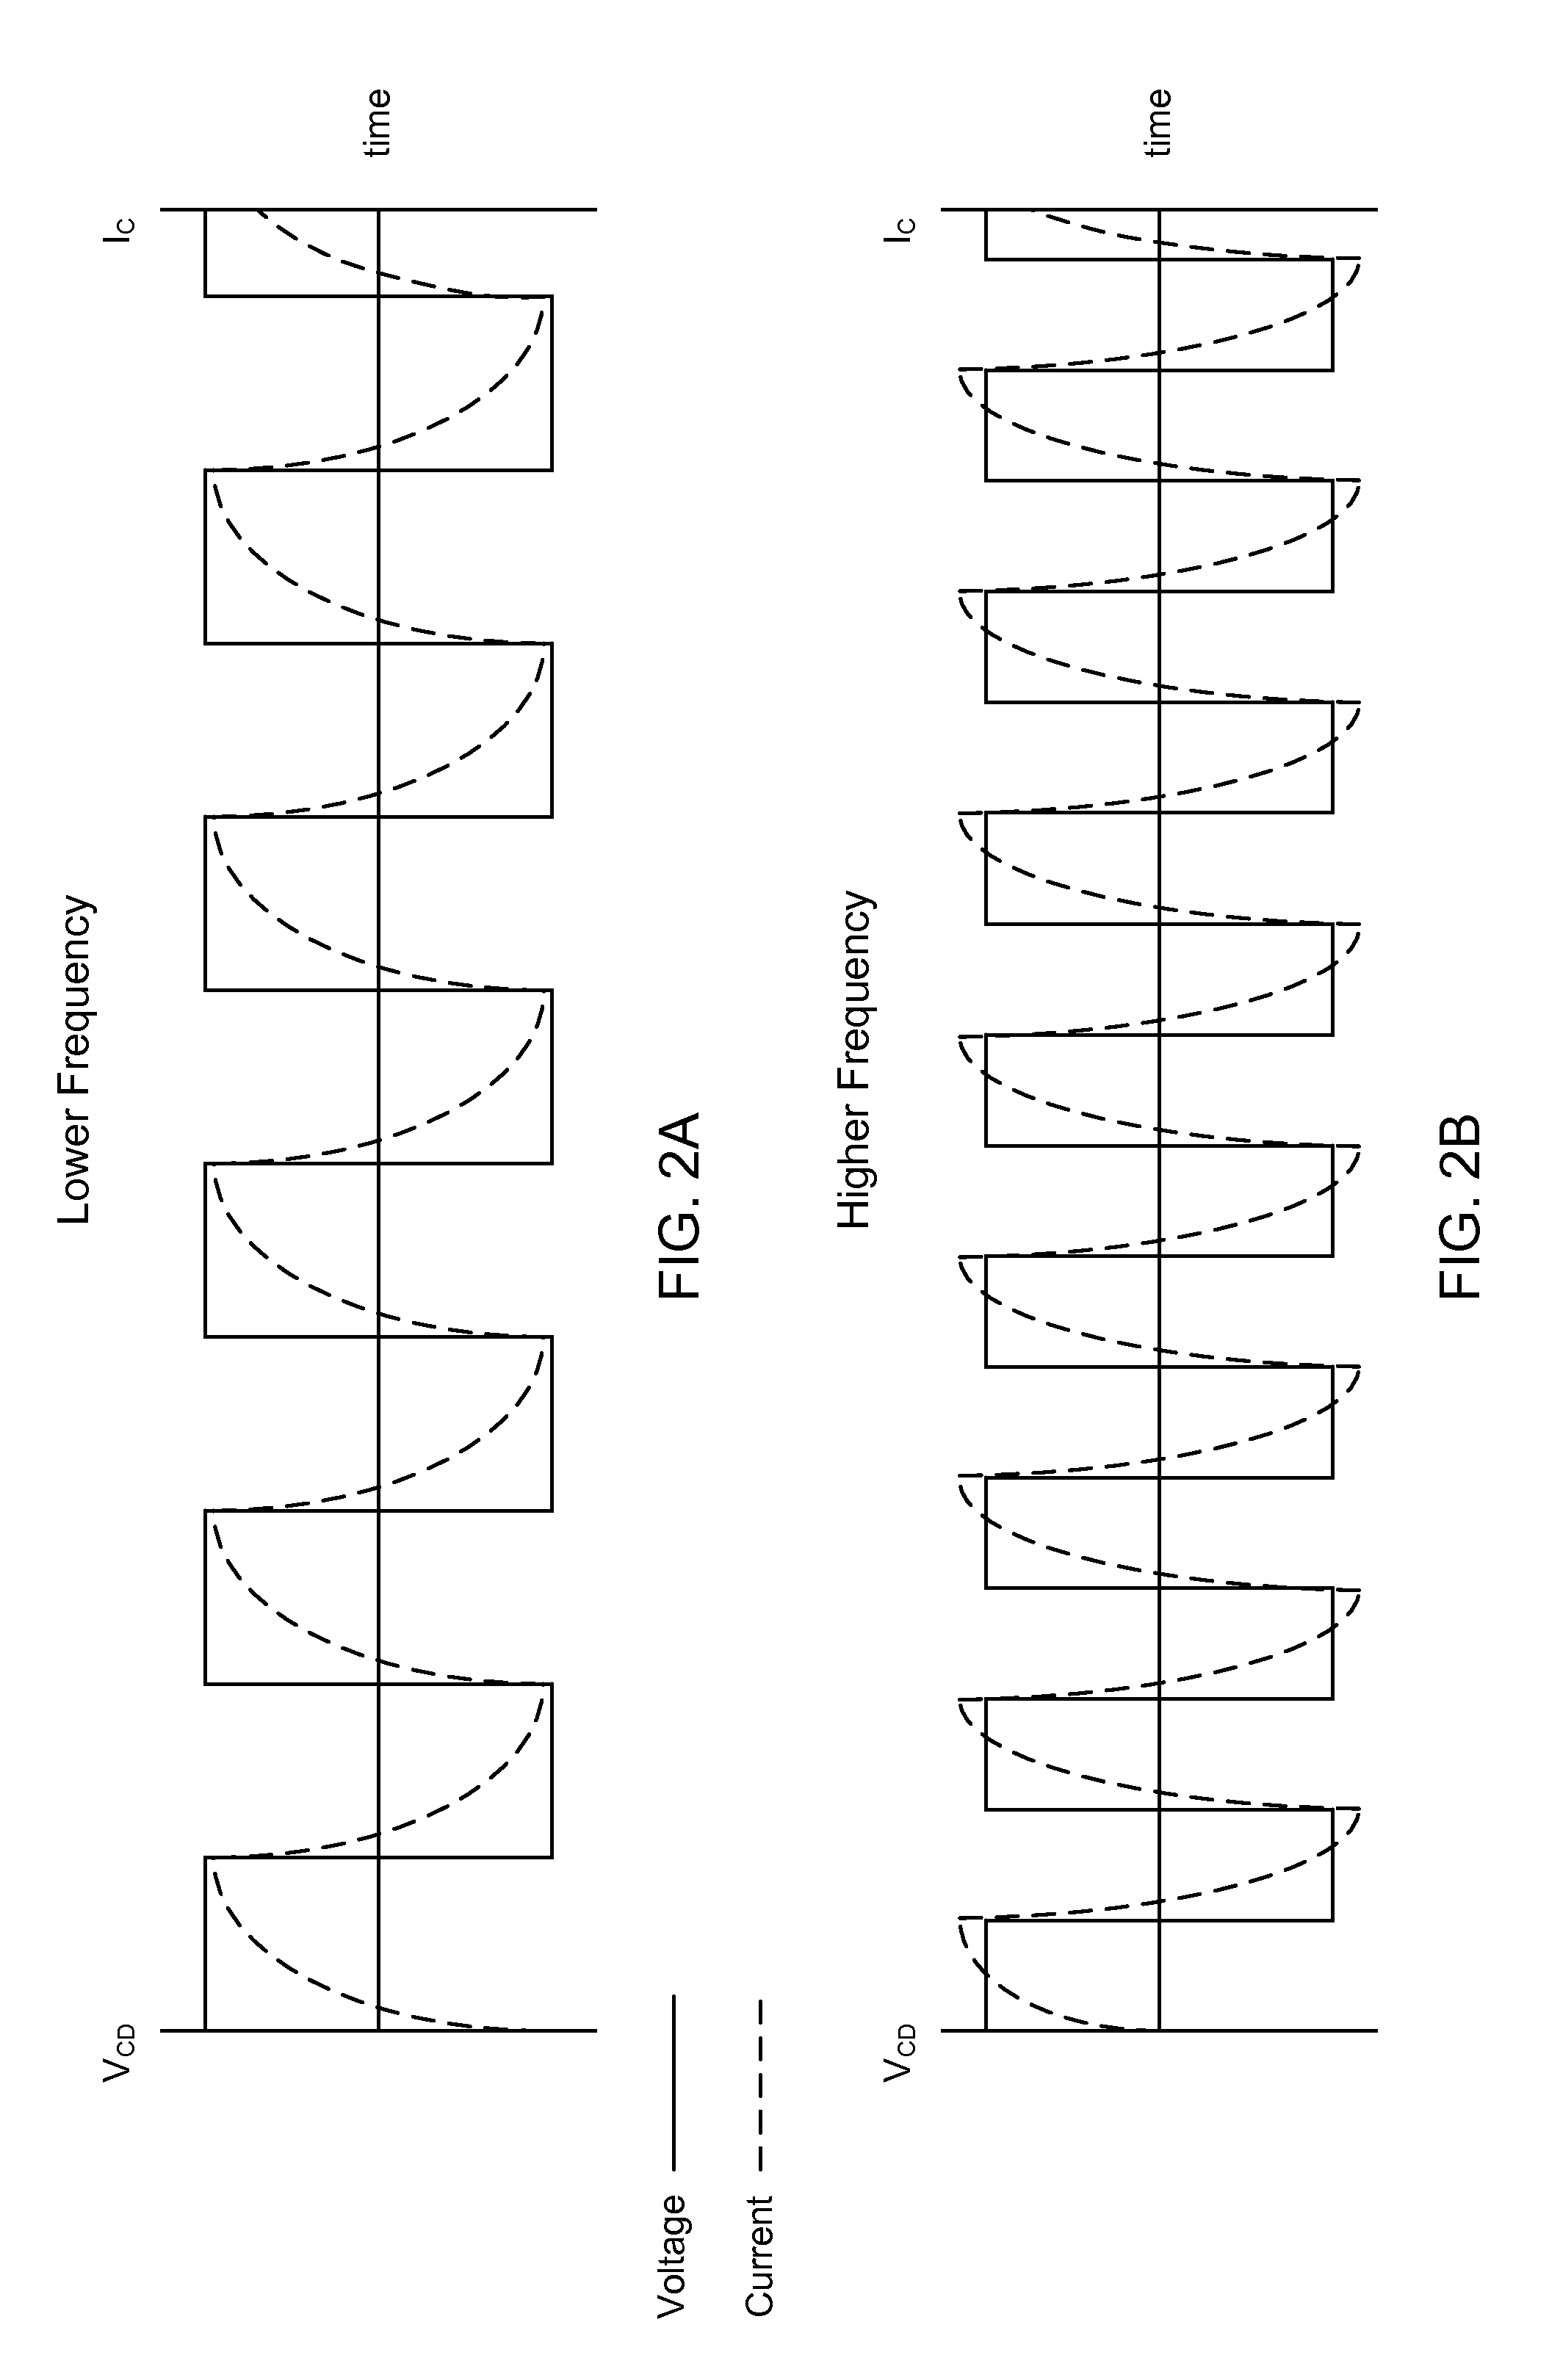 Charge removal from electrodes in unipolar sputtering system